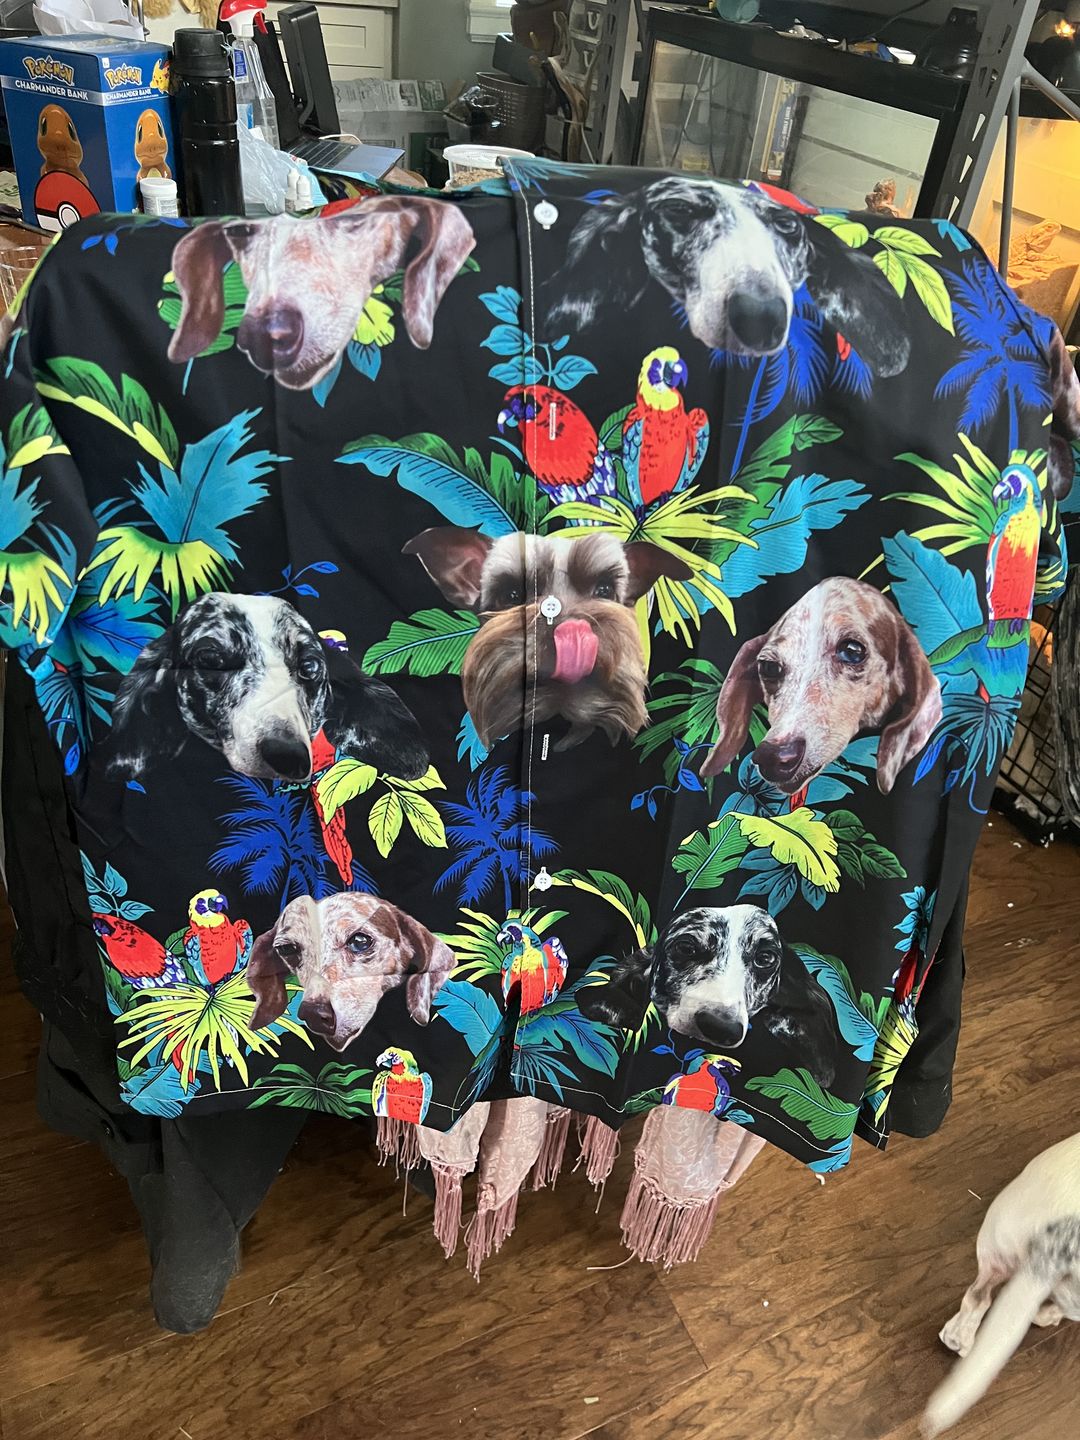 Custom Hawaiian Shirt With Pet Face | Personalized Gift For Pet Lovers | Tropical Pattern Aloha Shirt